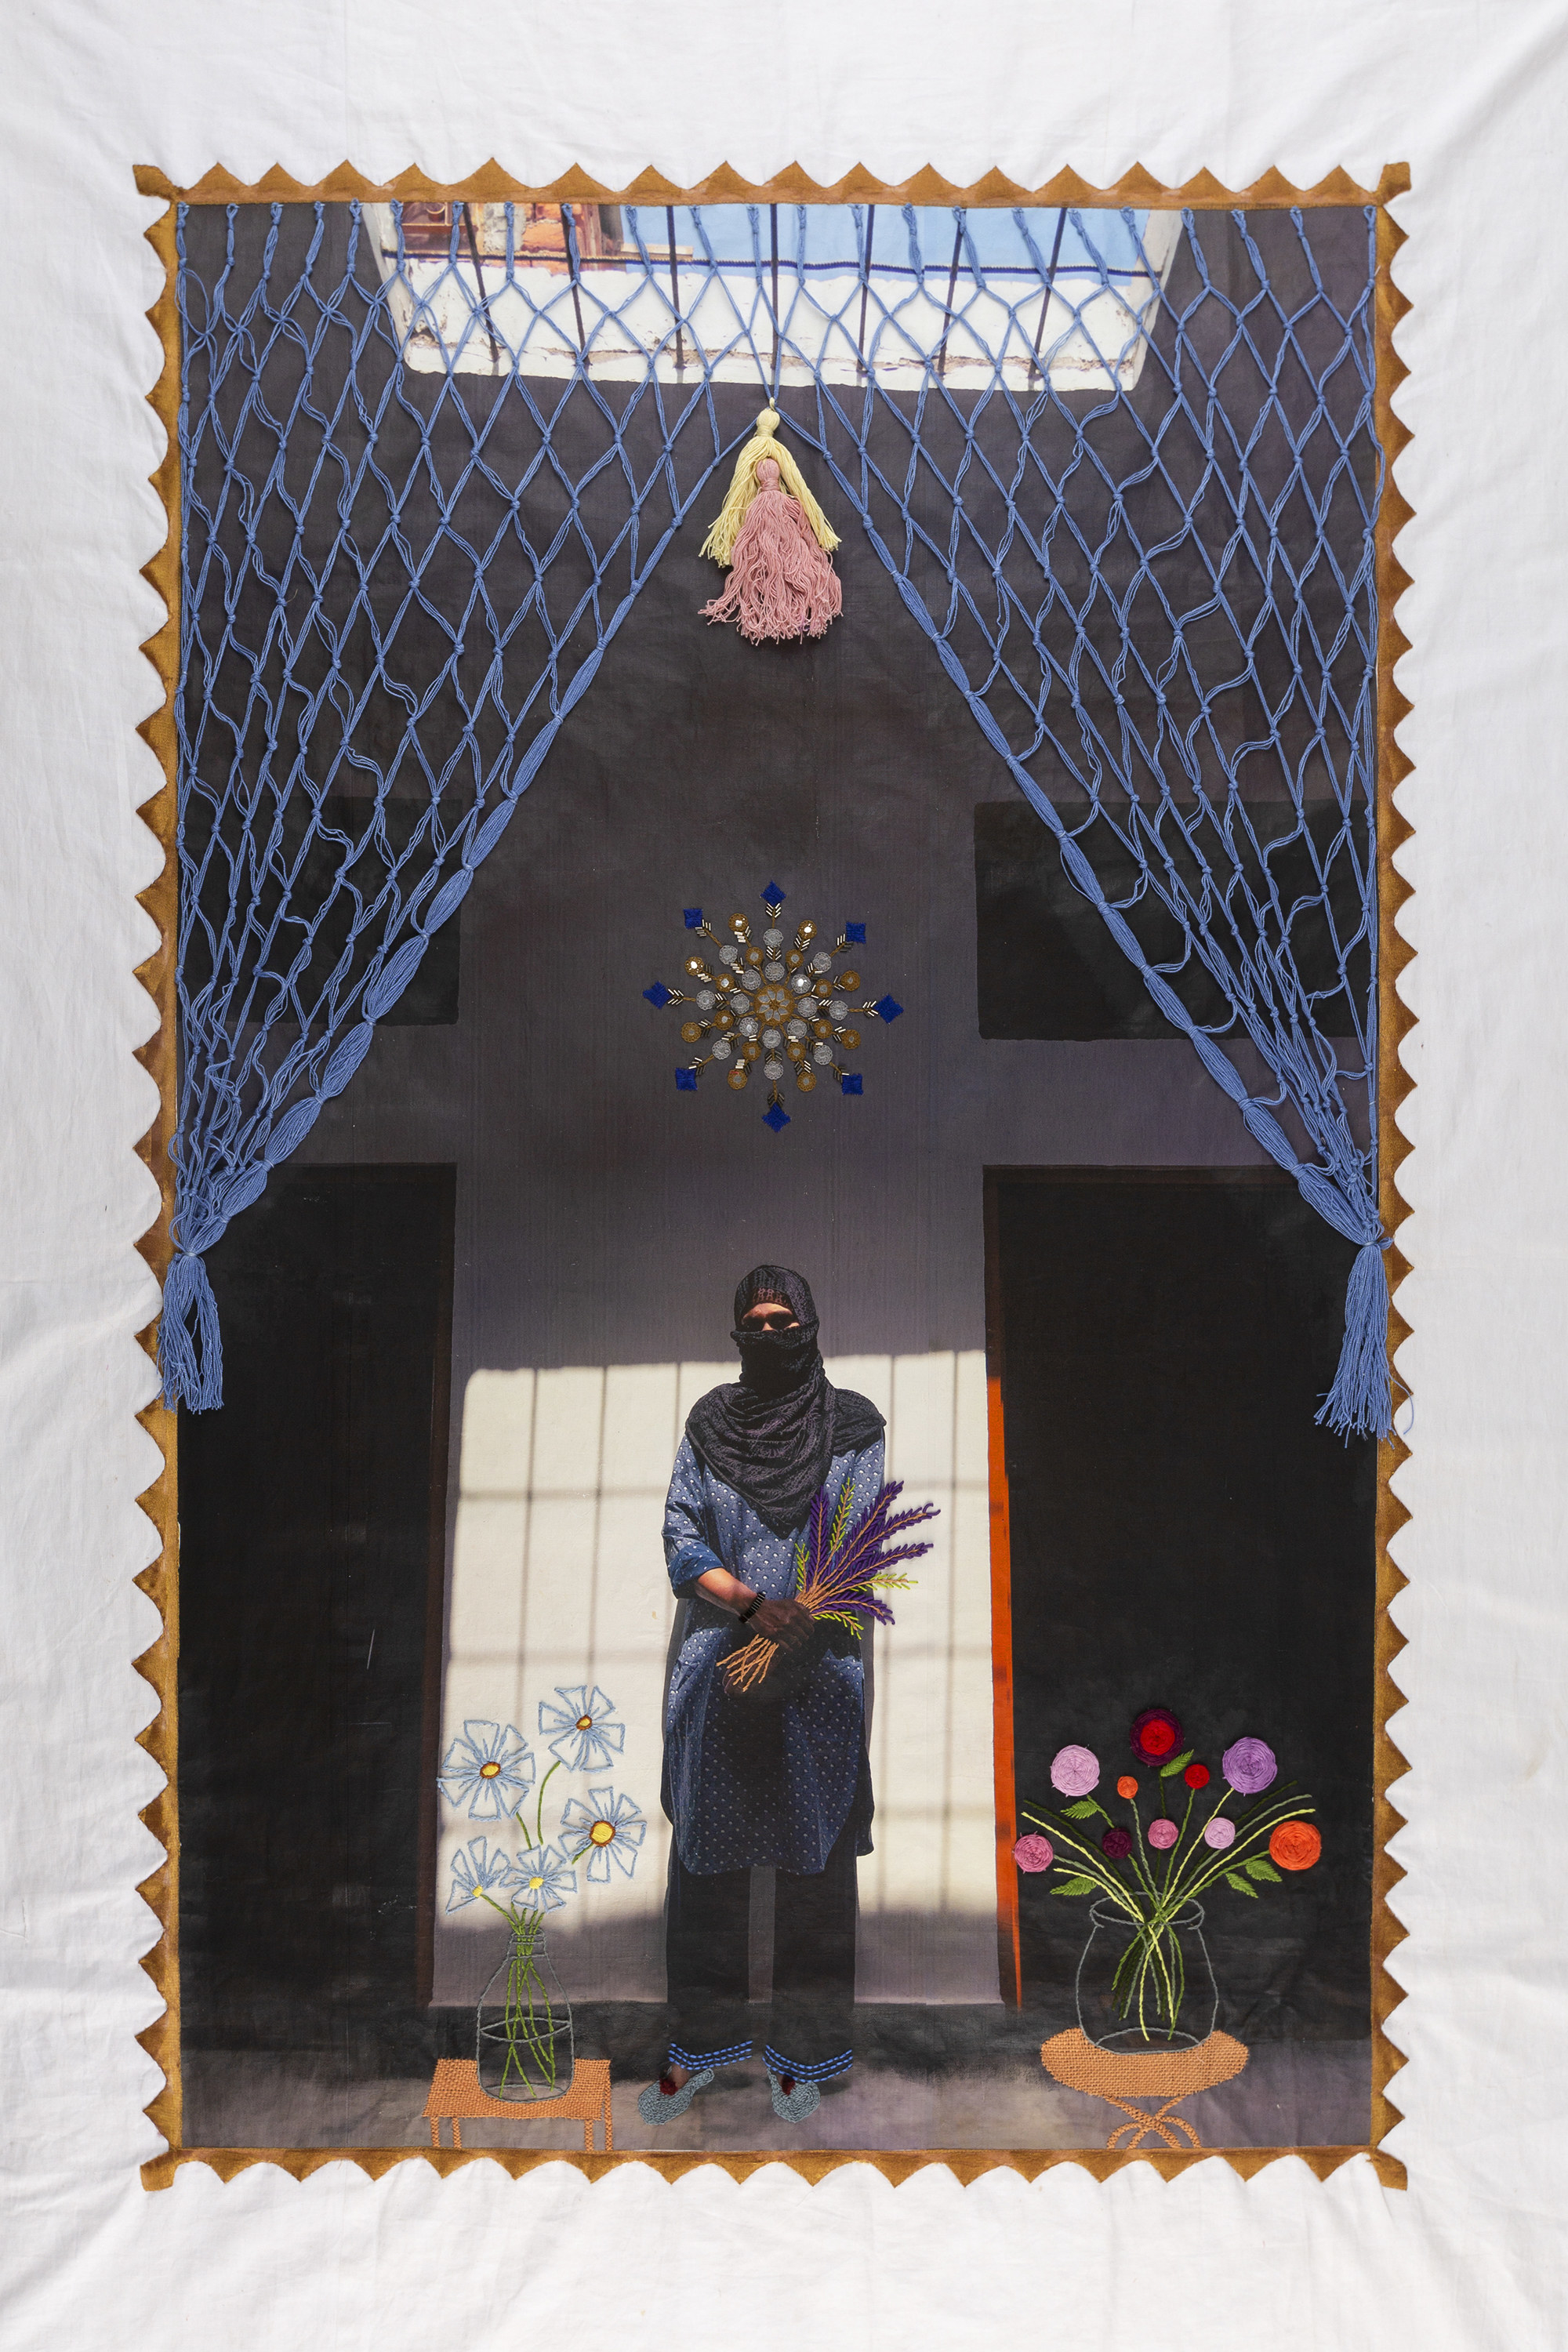 A woman stands in a room with two doorways, embroidered is a curtain, mandala, and flowers on tables